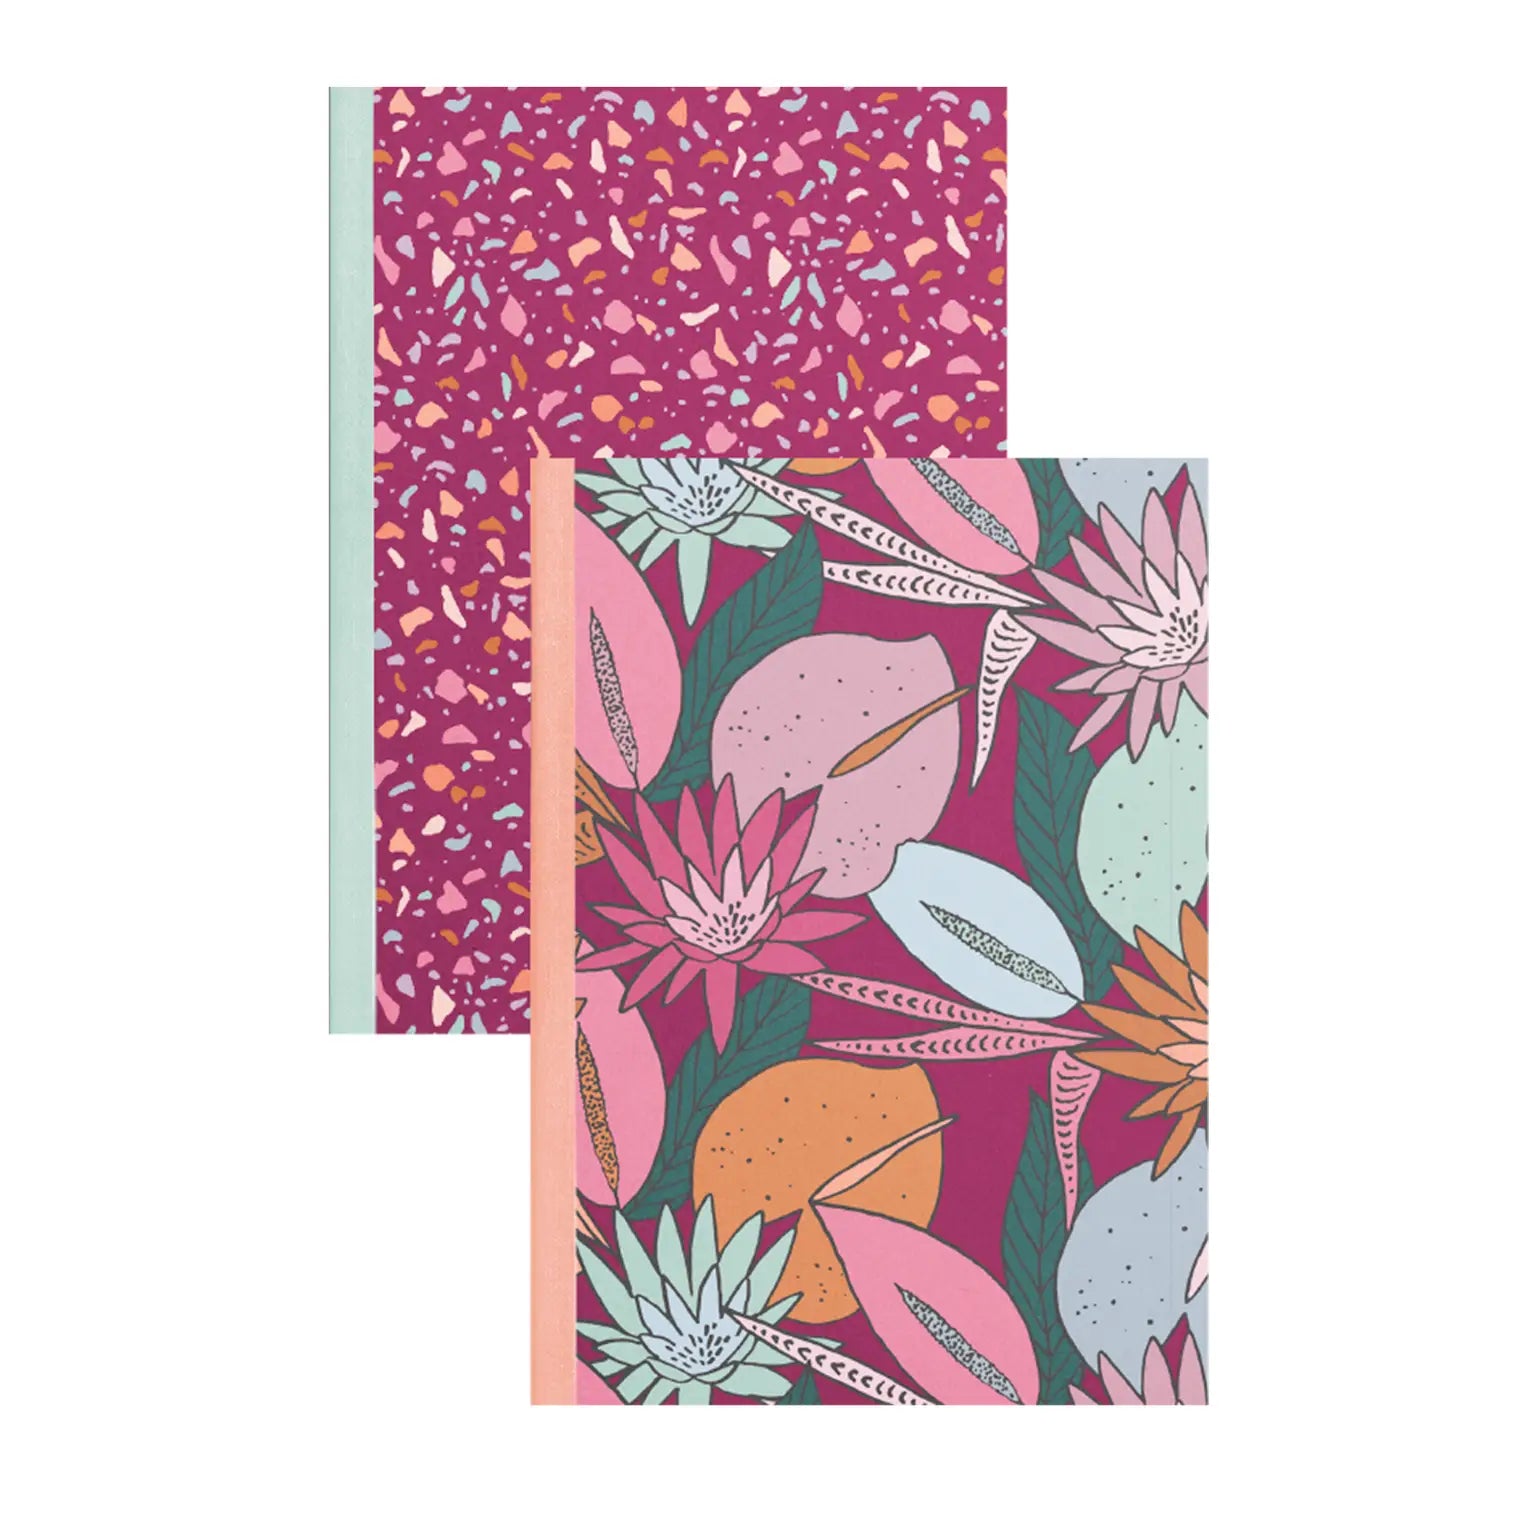 Two notebook covers. One is purple with blue, pink, and orange terrazzo pattern. The other notebook has a purple background with blue pink, and orange flowers and leaves